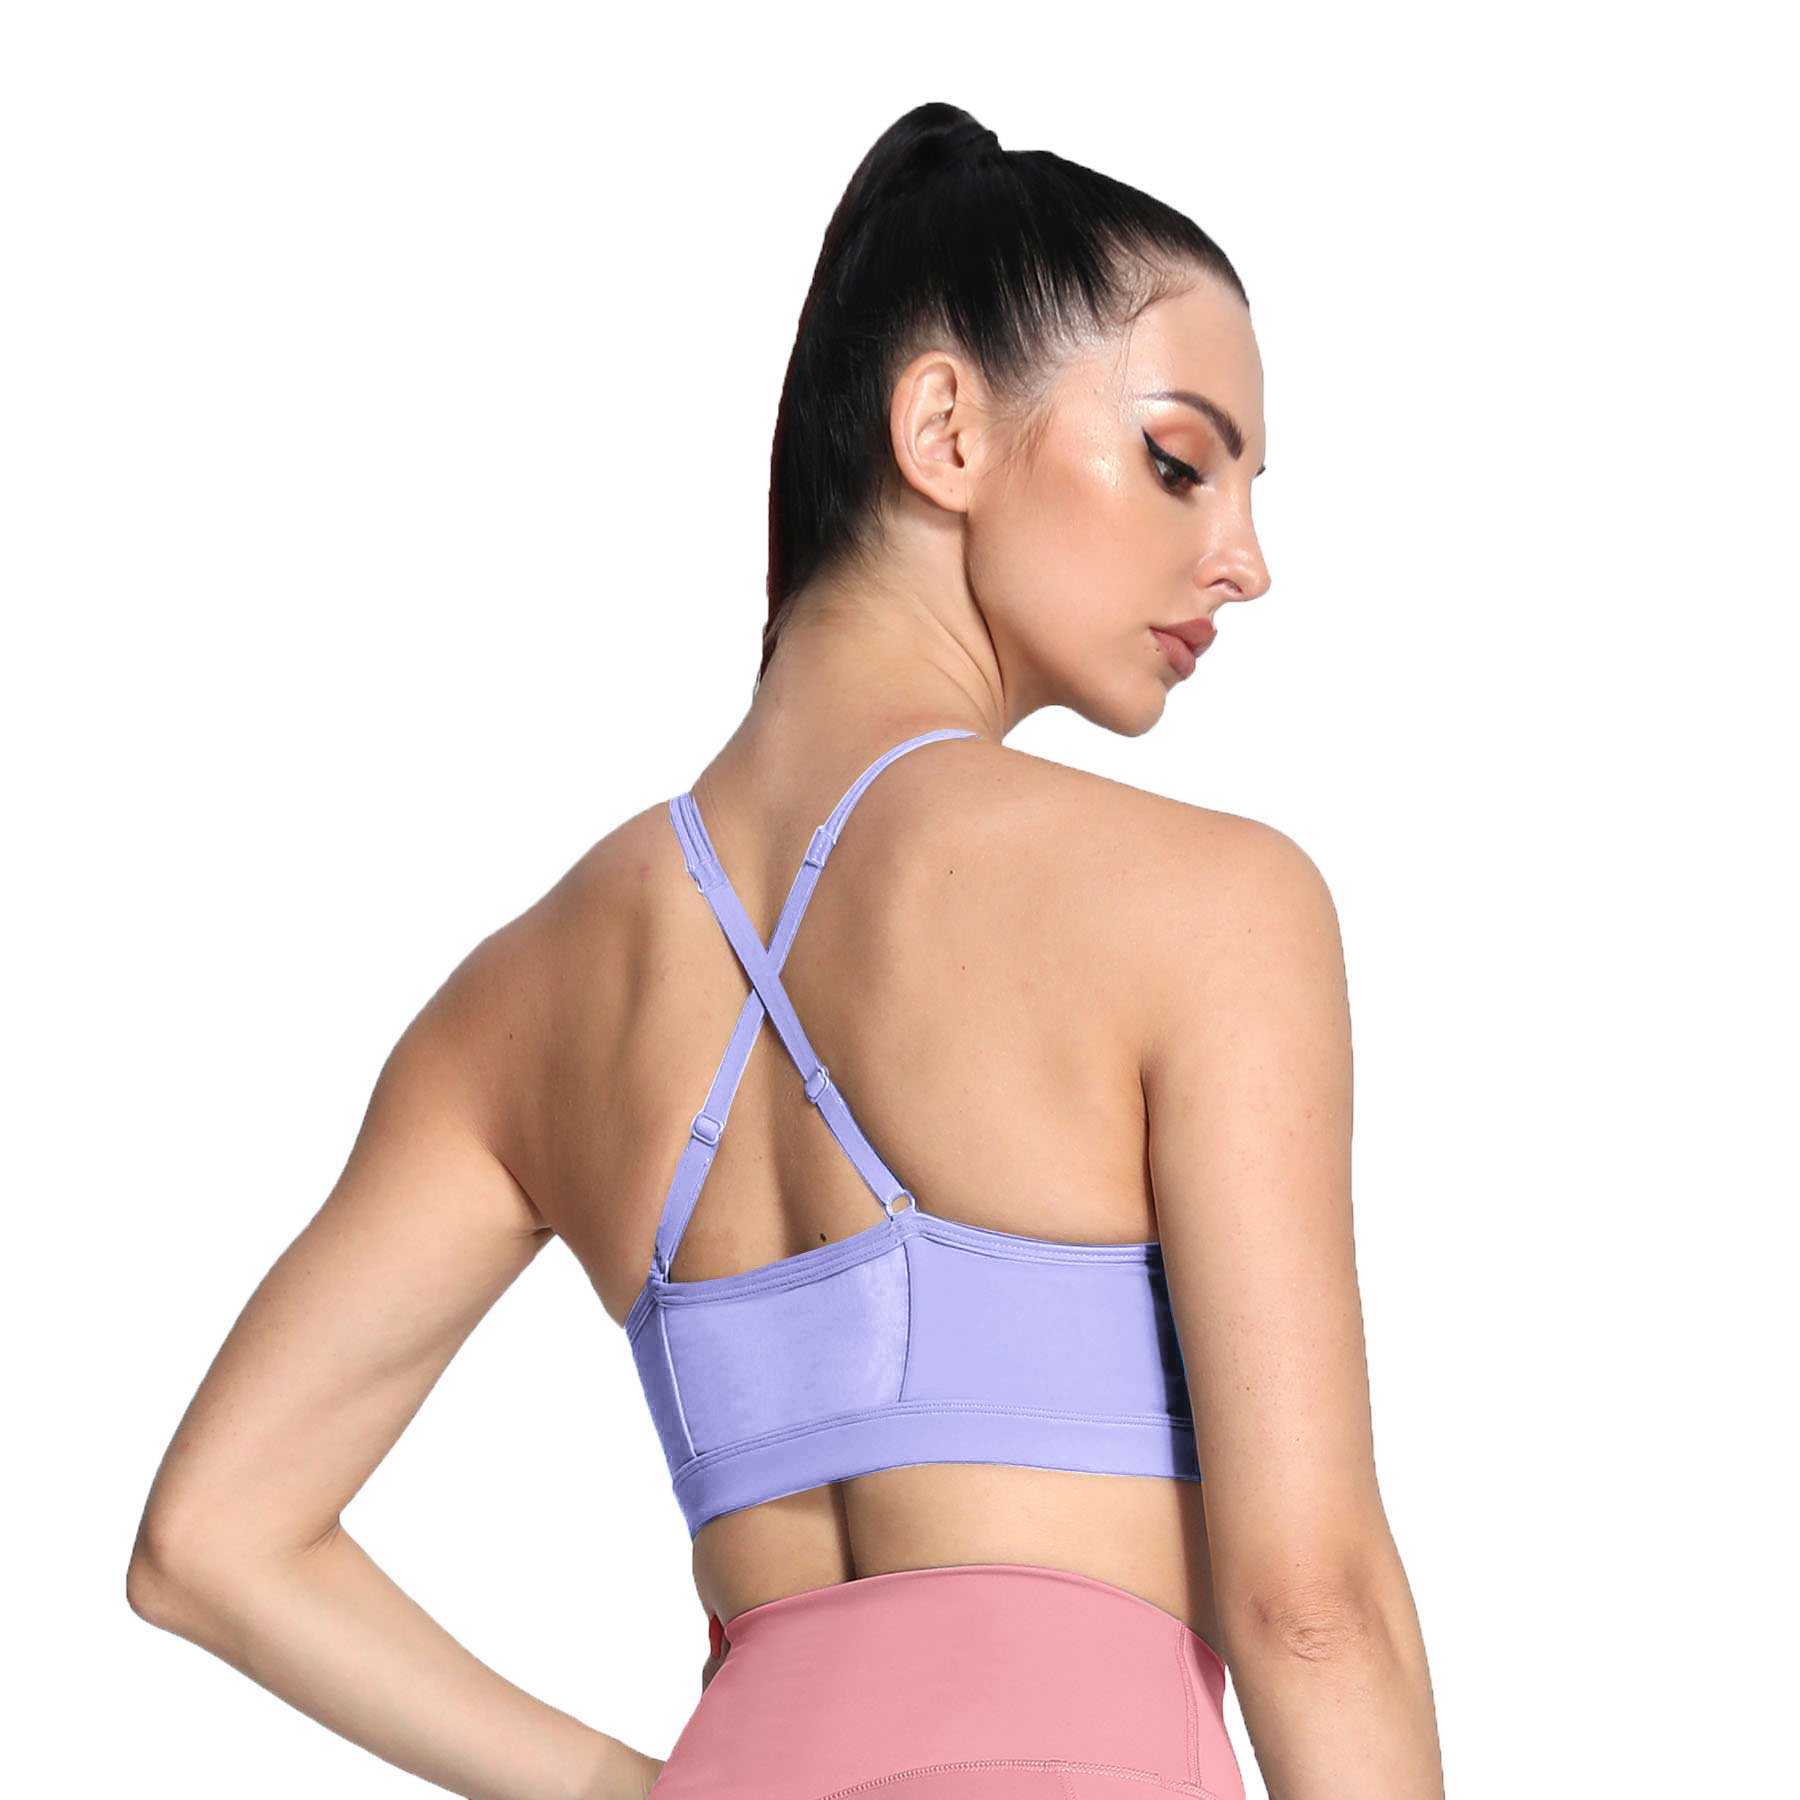 love this sports bra!! @AOXJOX #aoxjox #sportswear #active